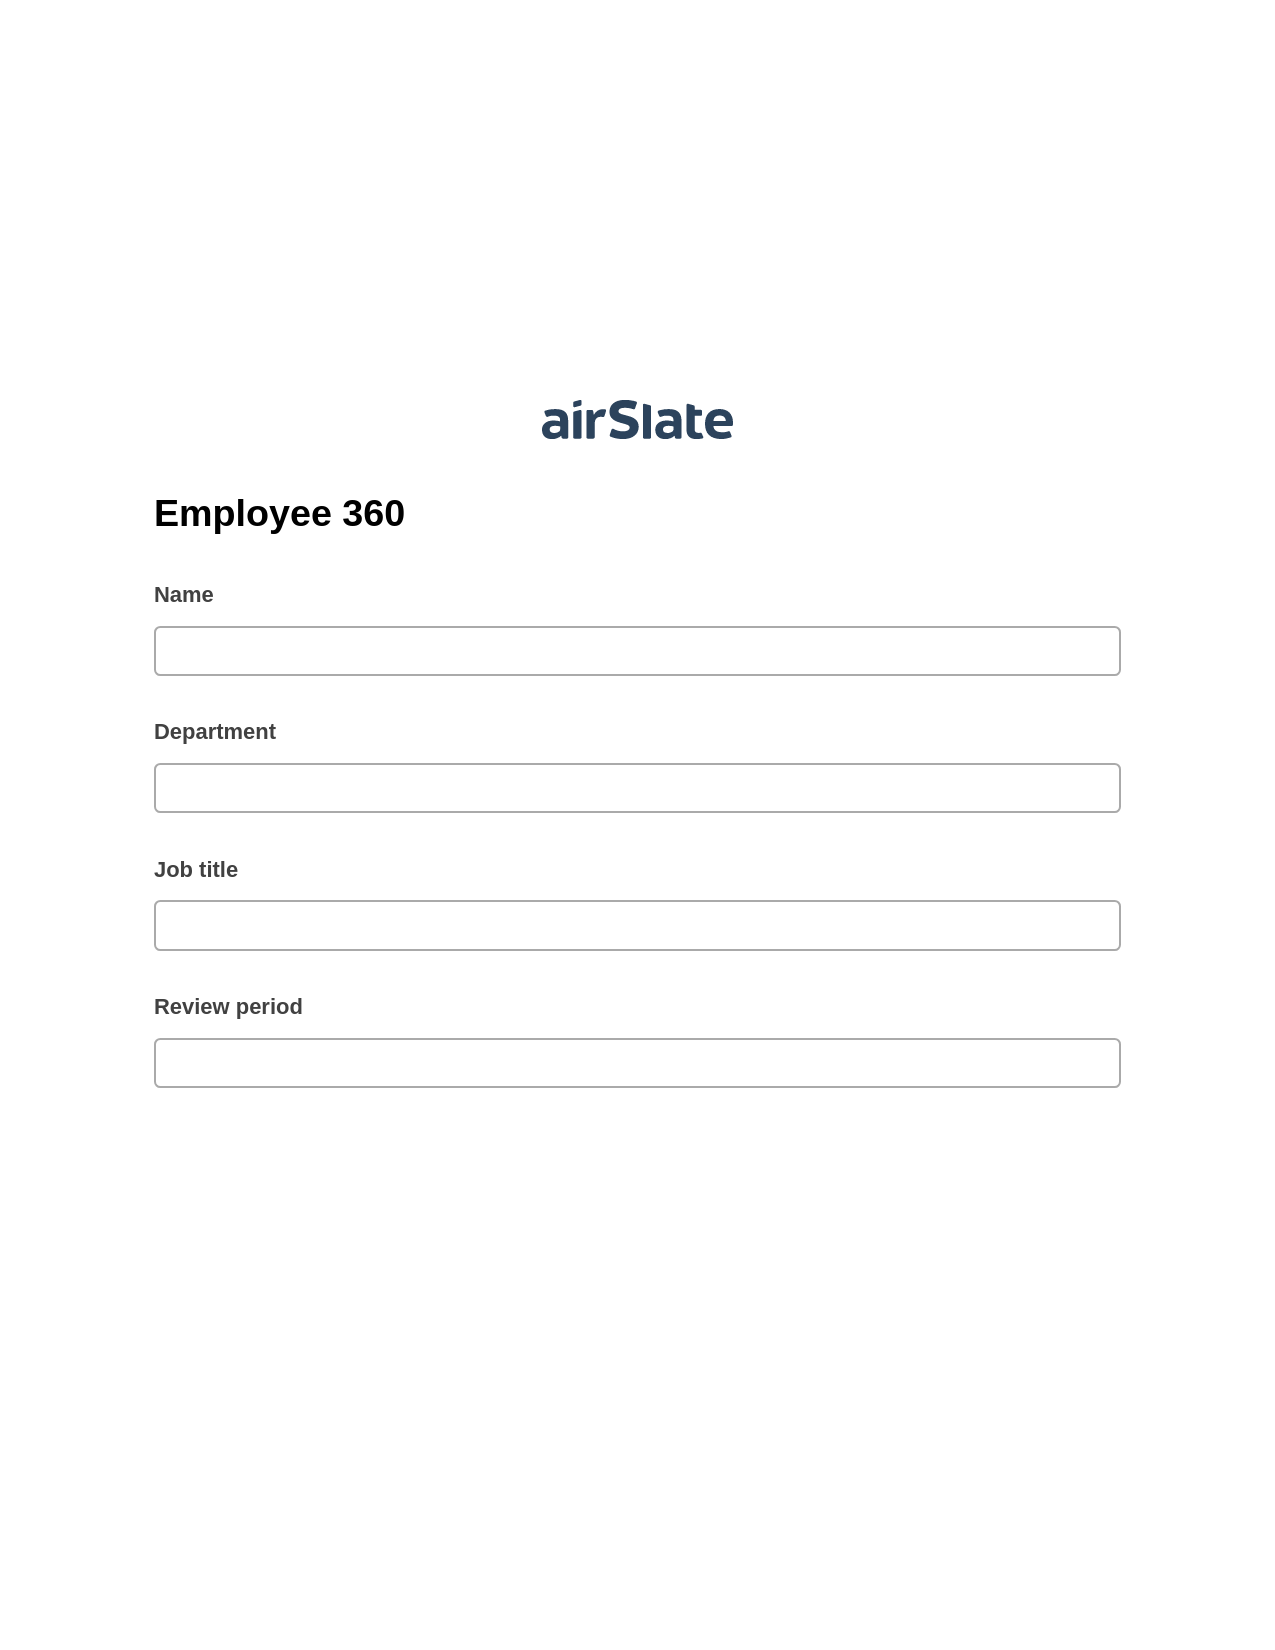 Employee 360 Pre-fill from CSV File Bot, Update MS Dynamics 365 Record Bot, Export to Salesforce Record Bot